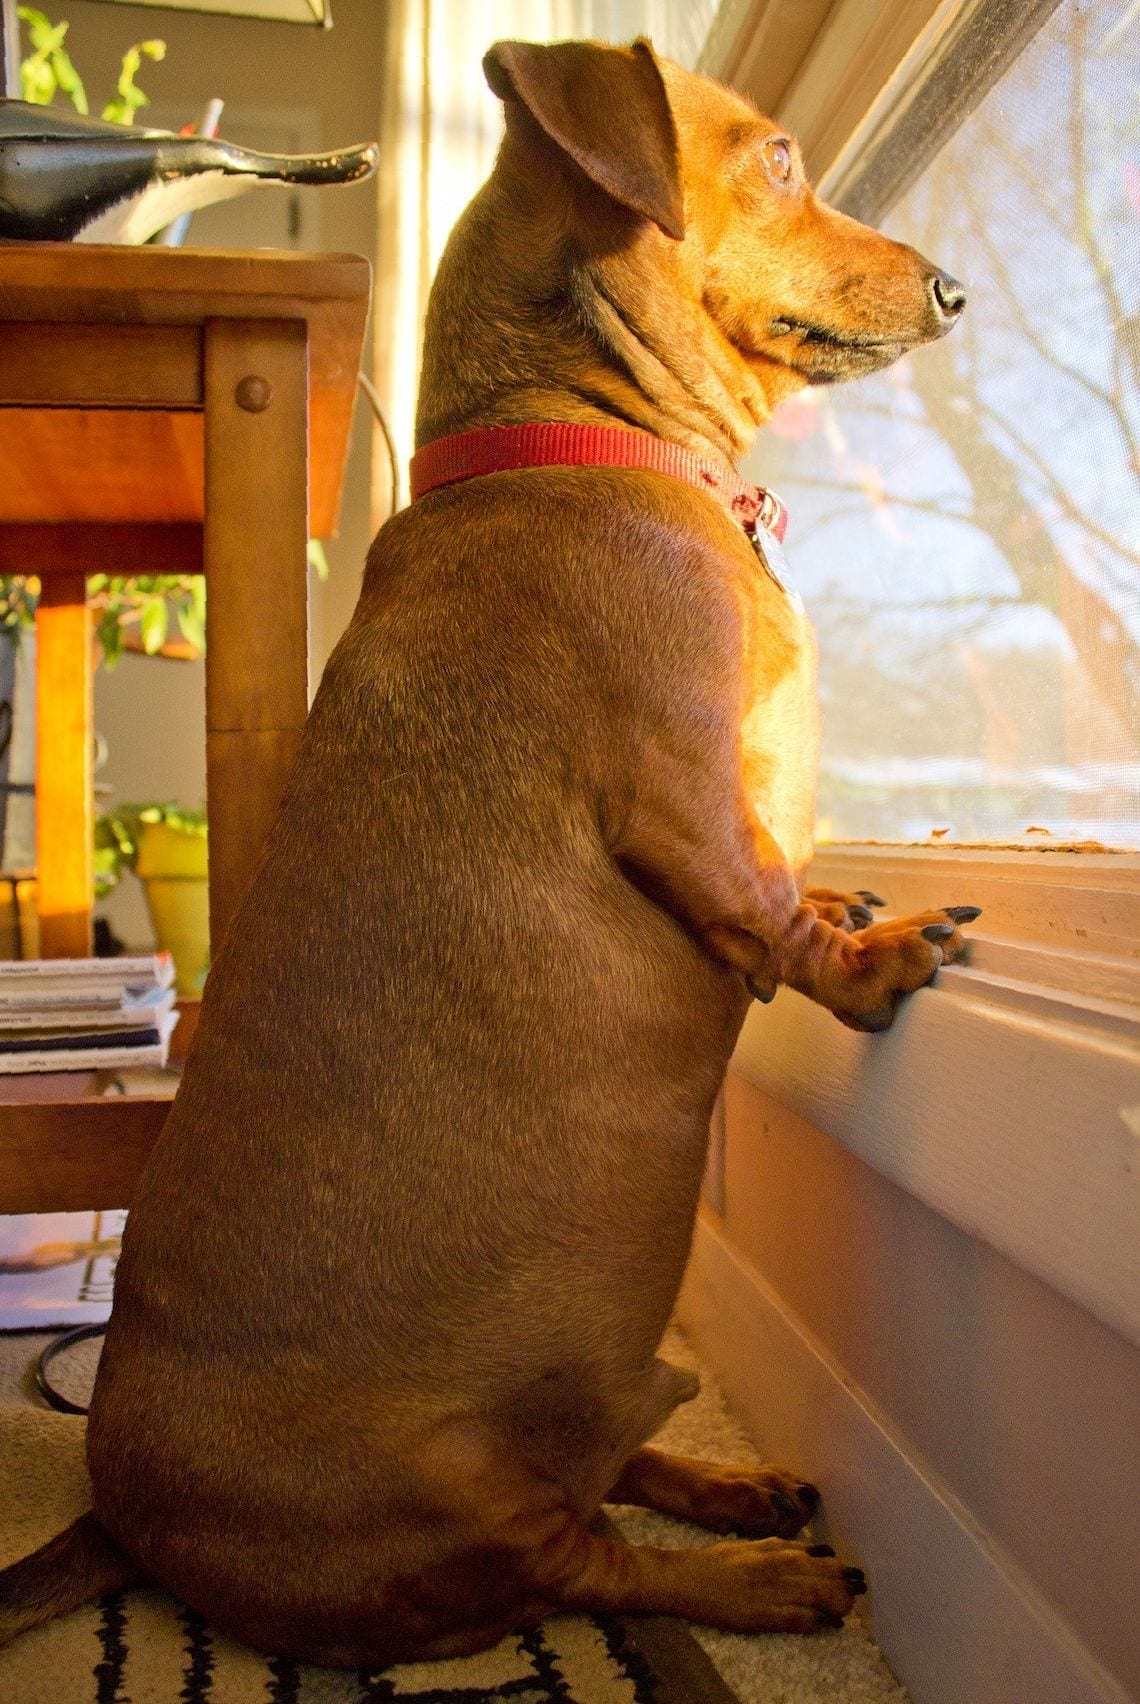 A chubby Dachshund sitting by the window while looking outside